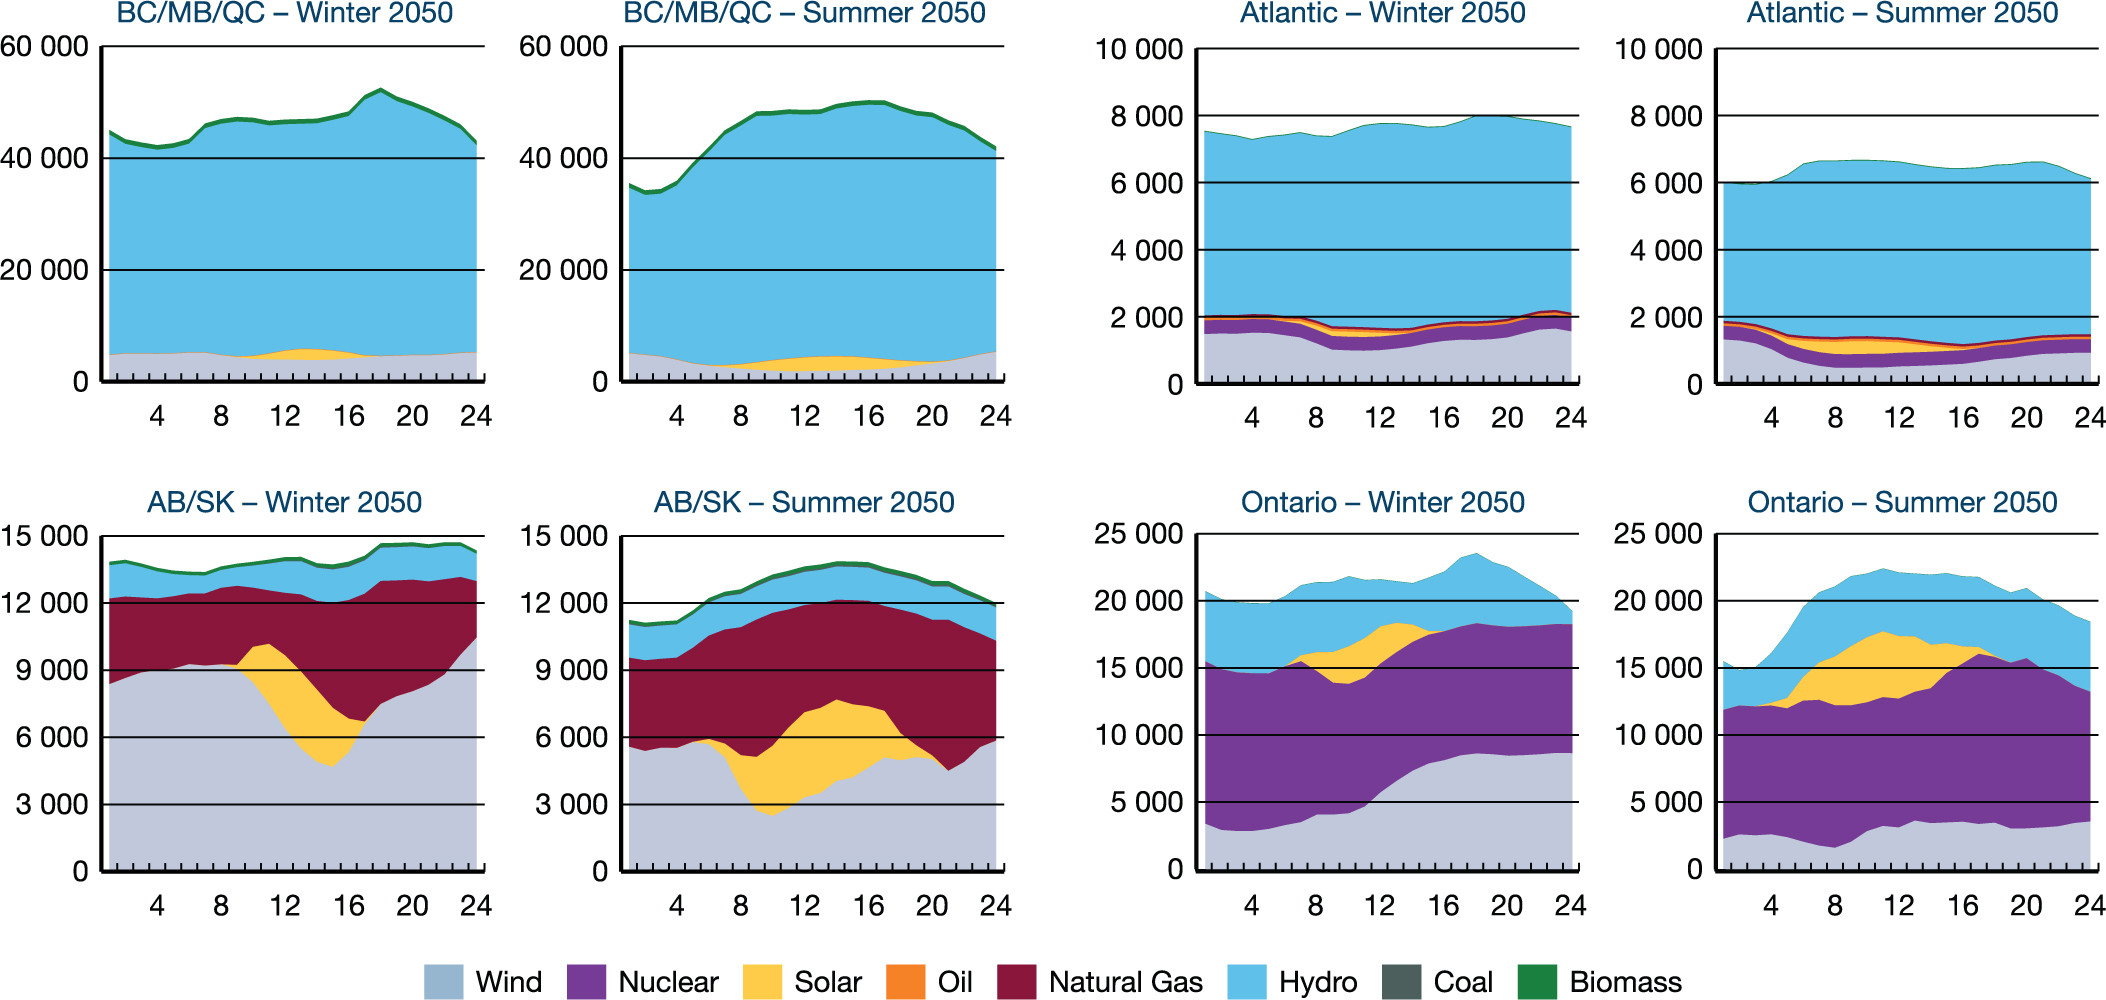 Simulated Hourly Electricity Generation in 2050, Evolving Scenario